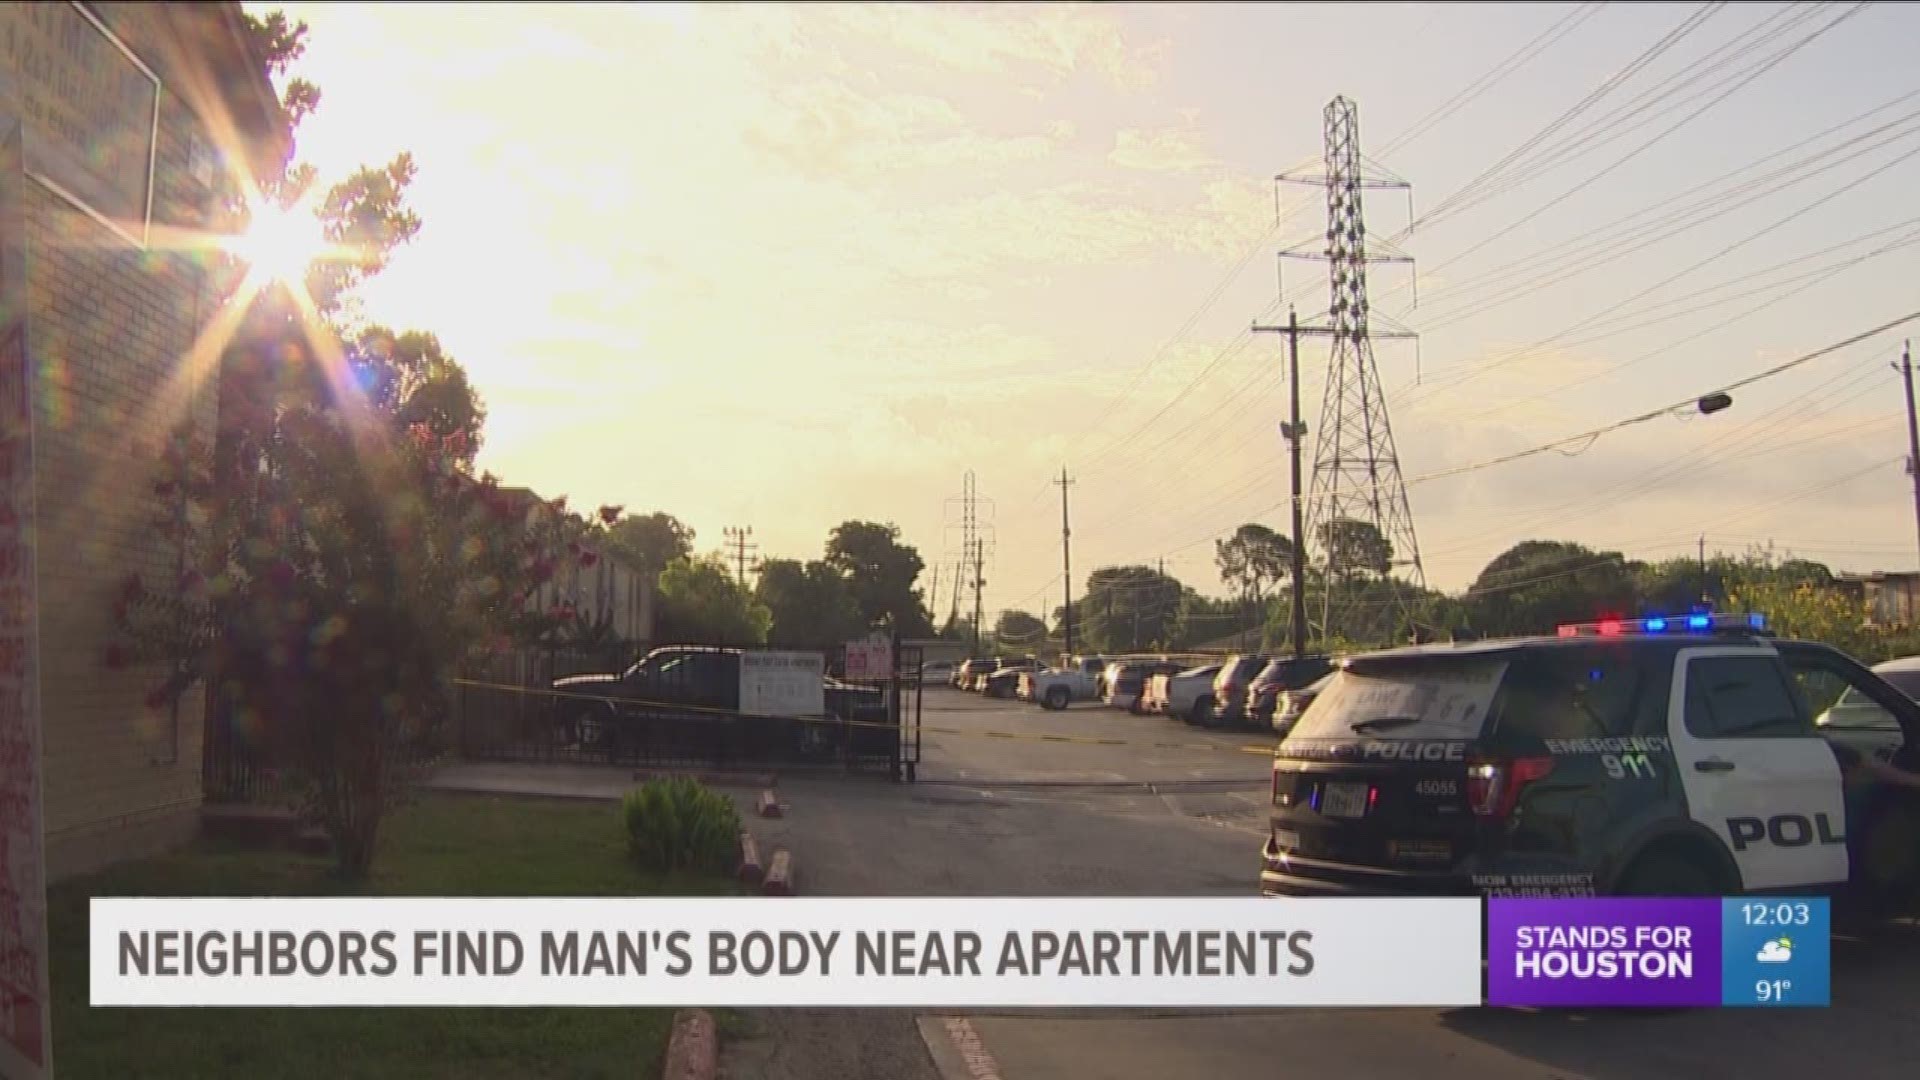 KHOU 11's Shern-Min Chow reports on the discovery of a man's body in southeast Houston